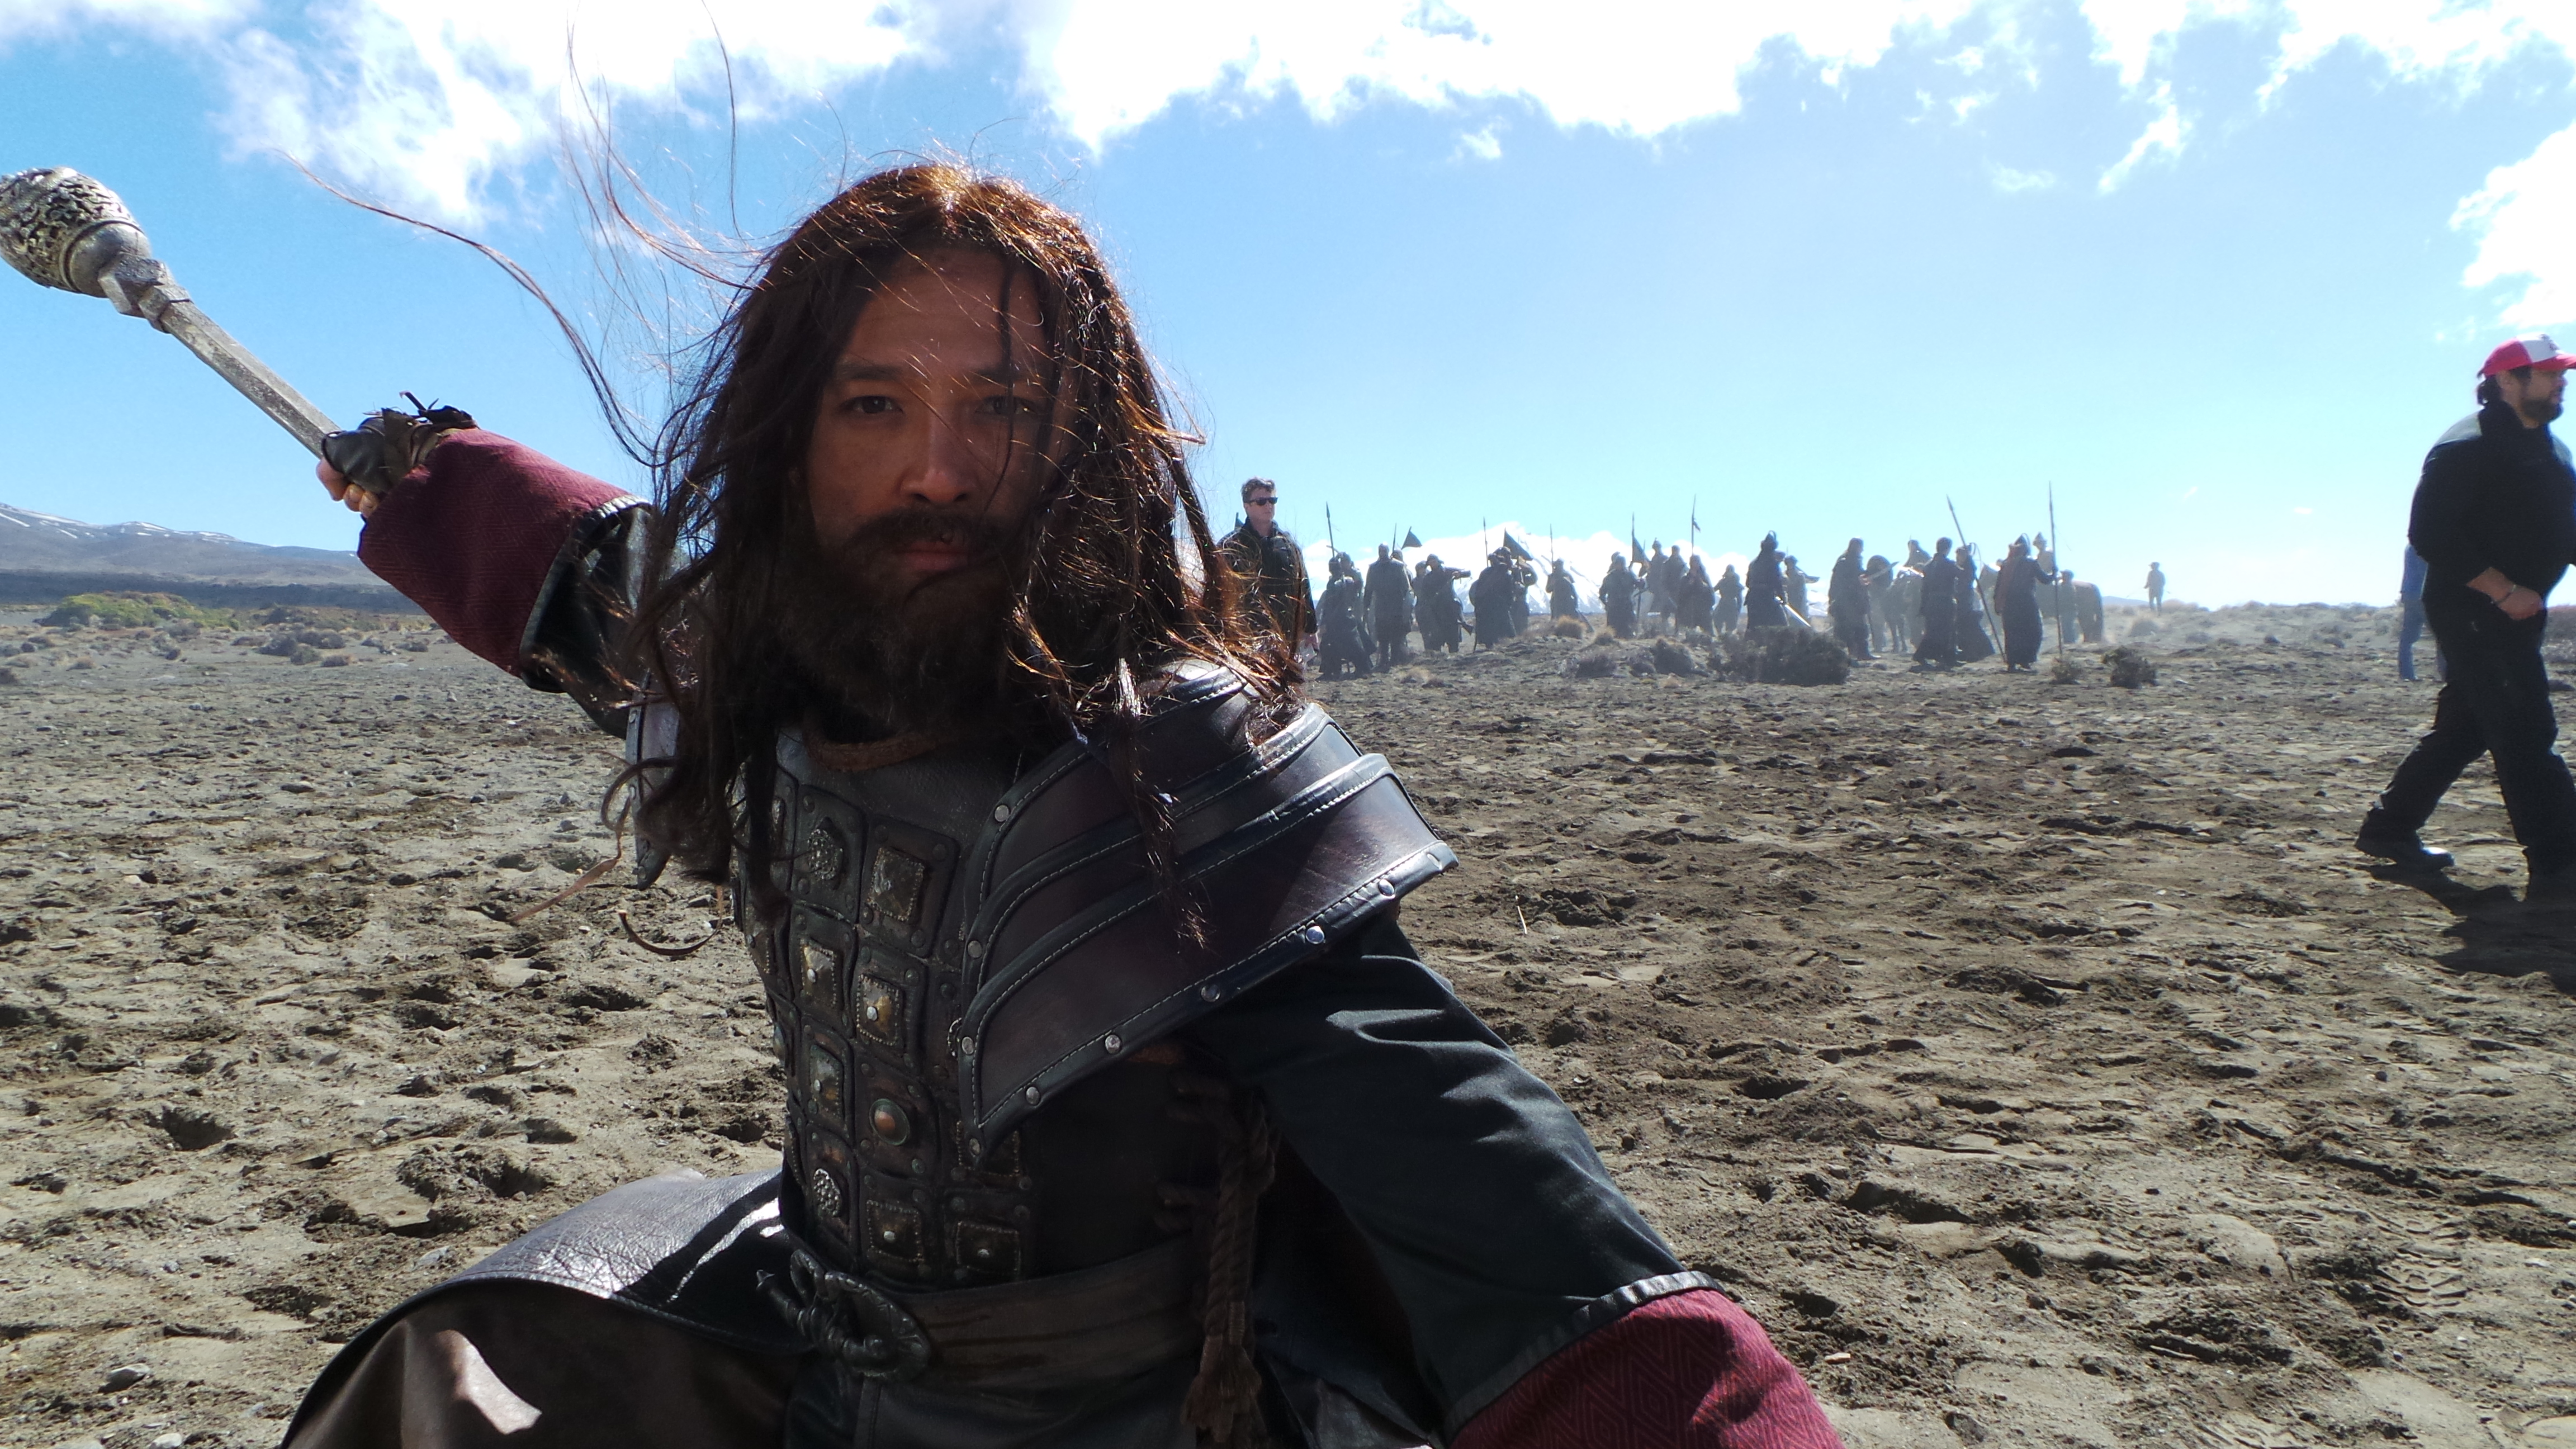 Khanh as 'Genghis Khan' on location for Nissan Juke TVC, 13/09/13